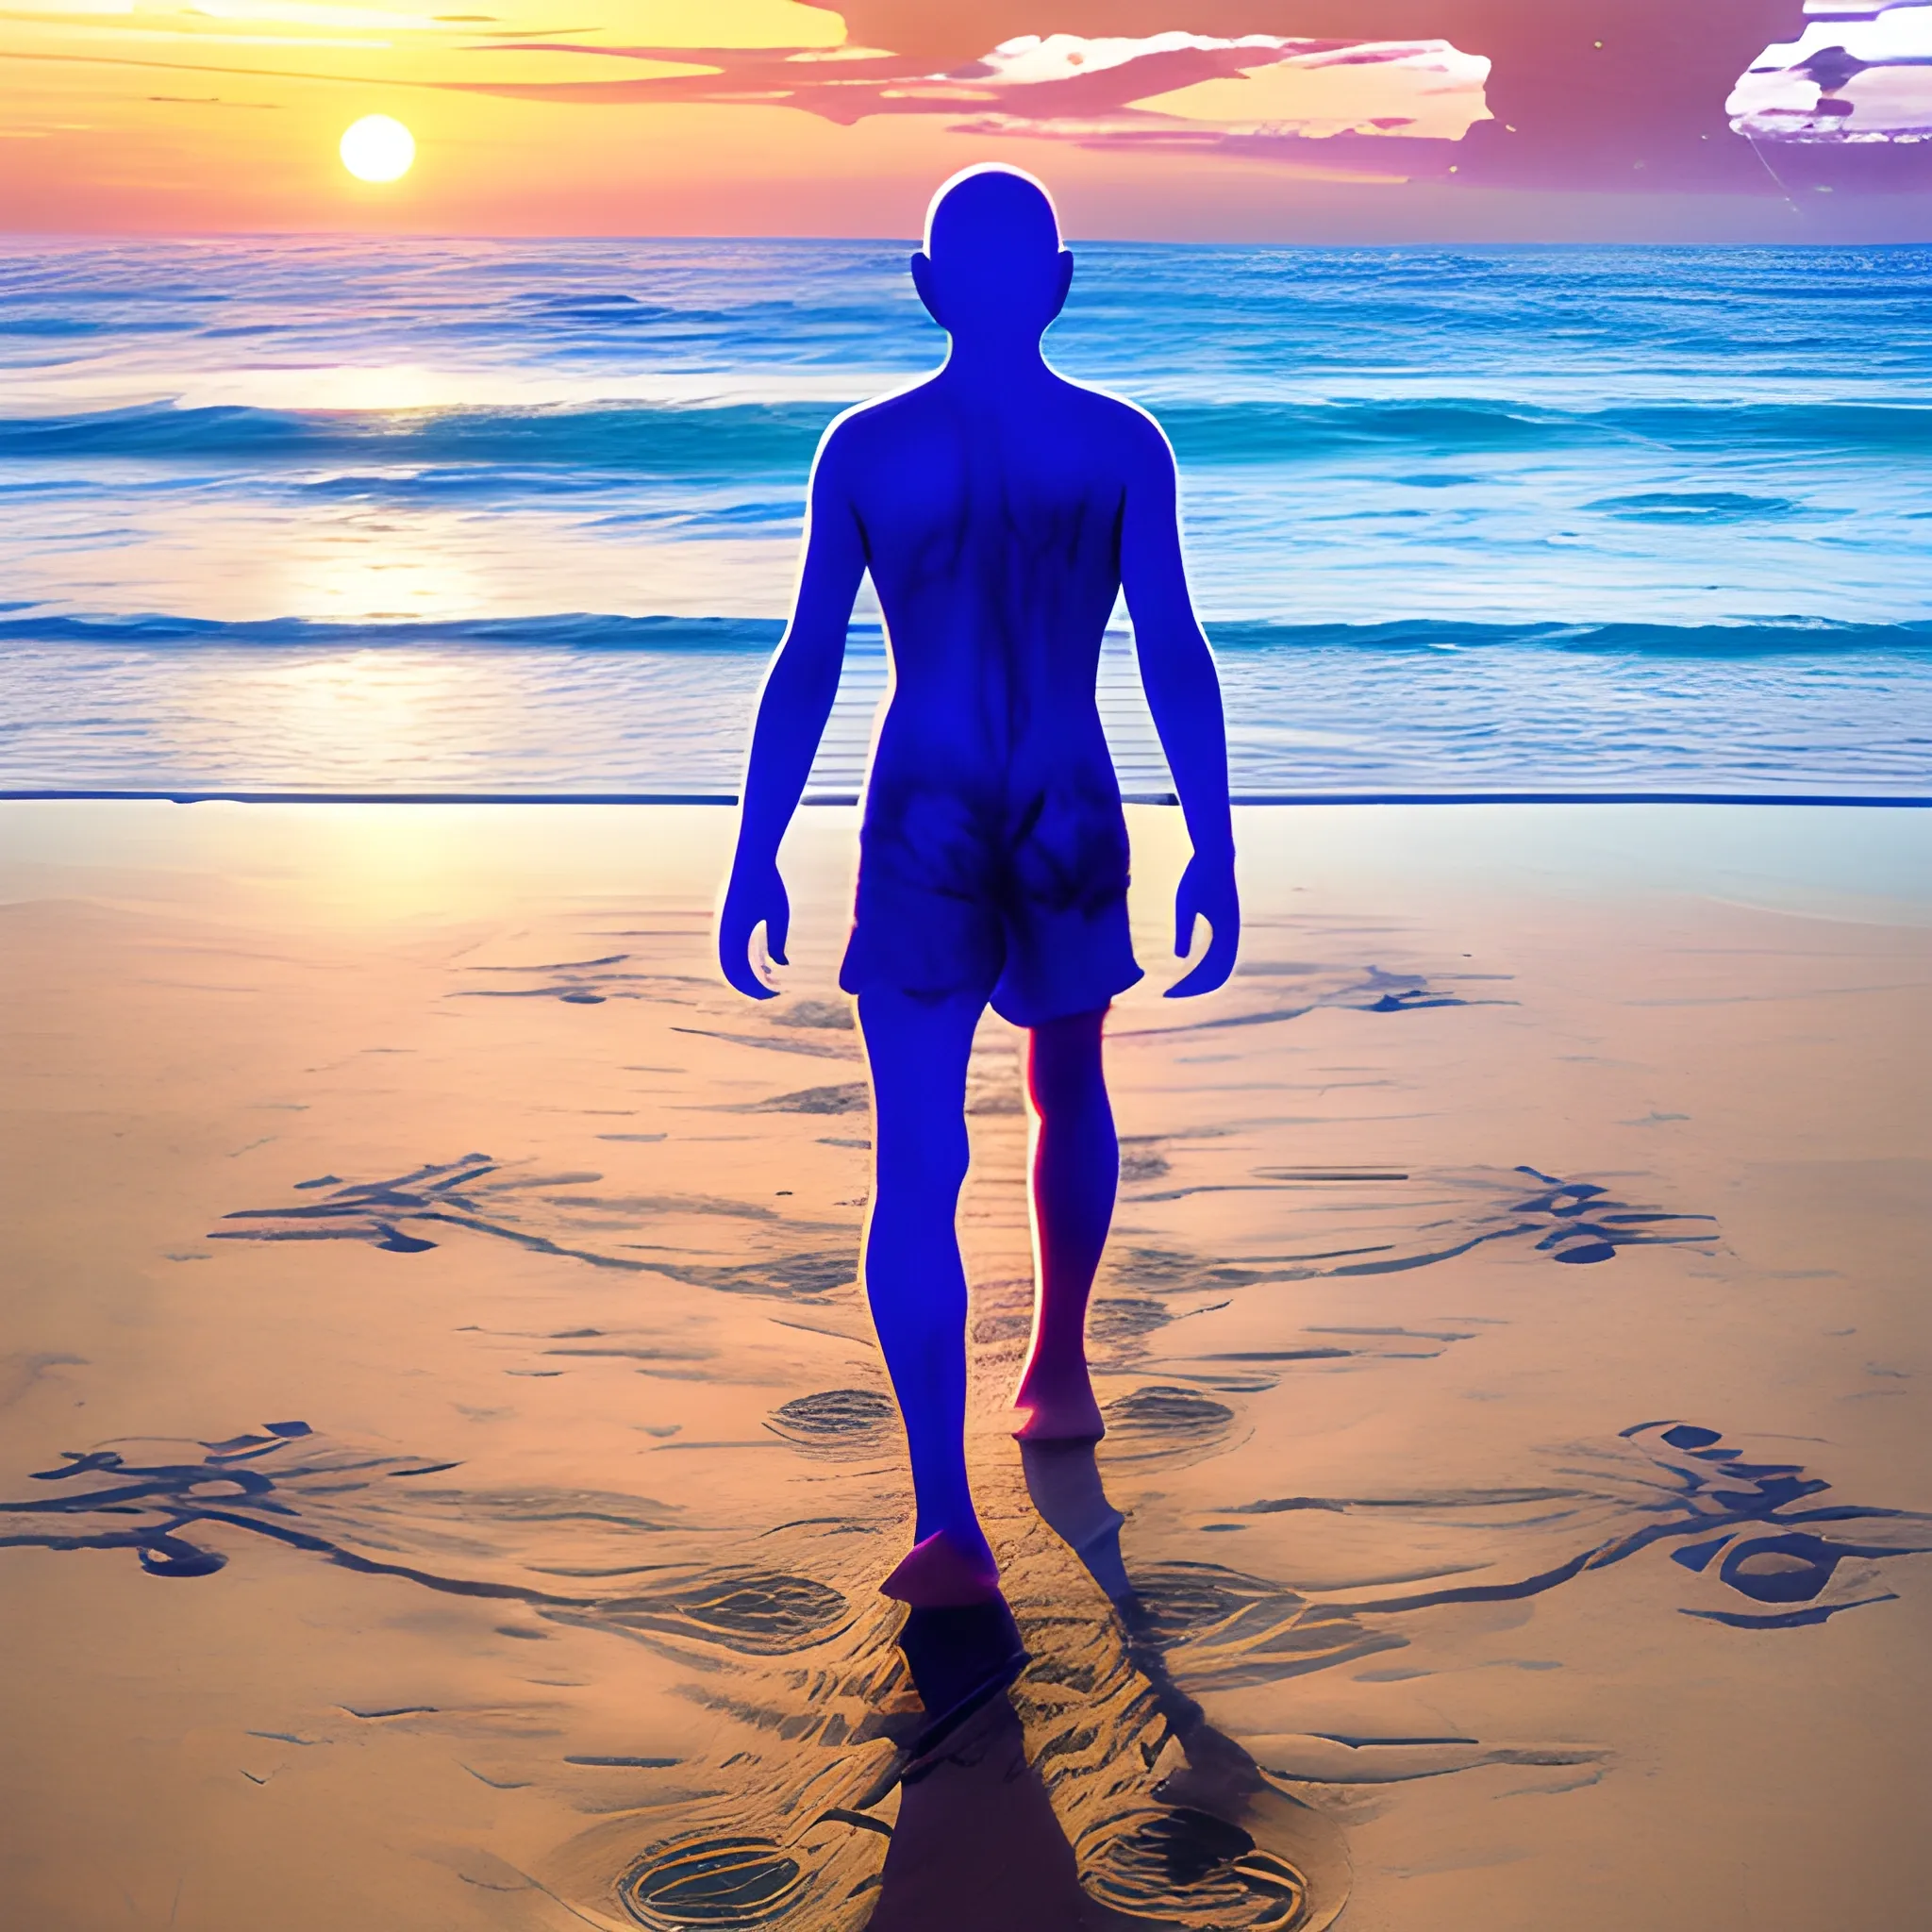 
human being with the seven chakras, beach, sunset, universe, moon, caduceus, walking to the sea, initiation, footprints in the sand


